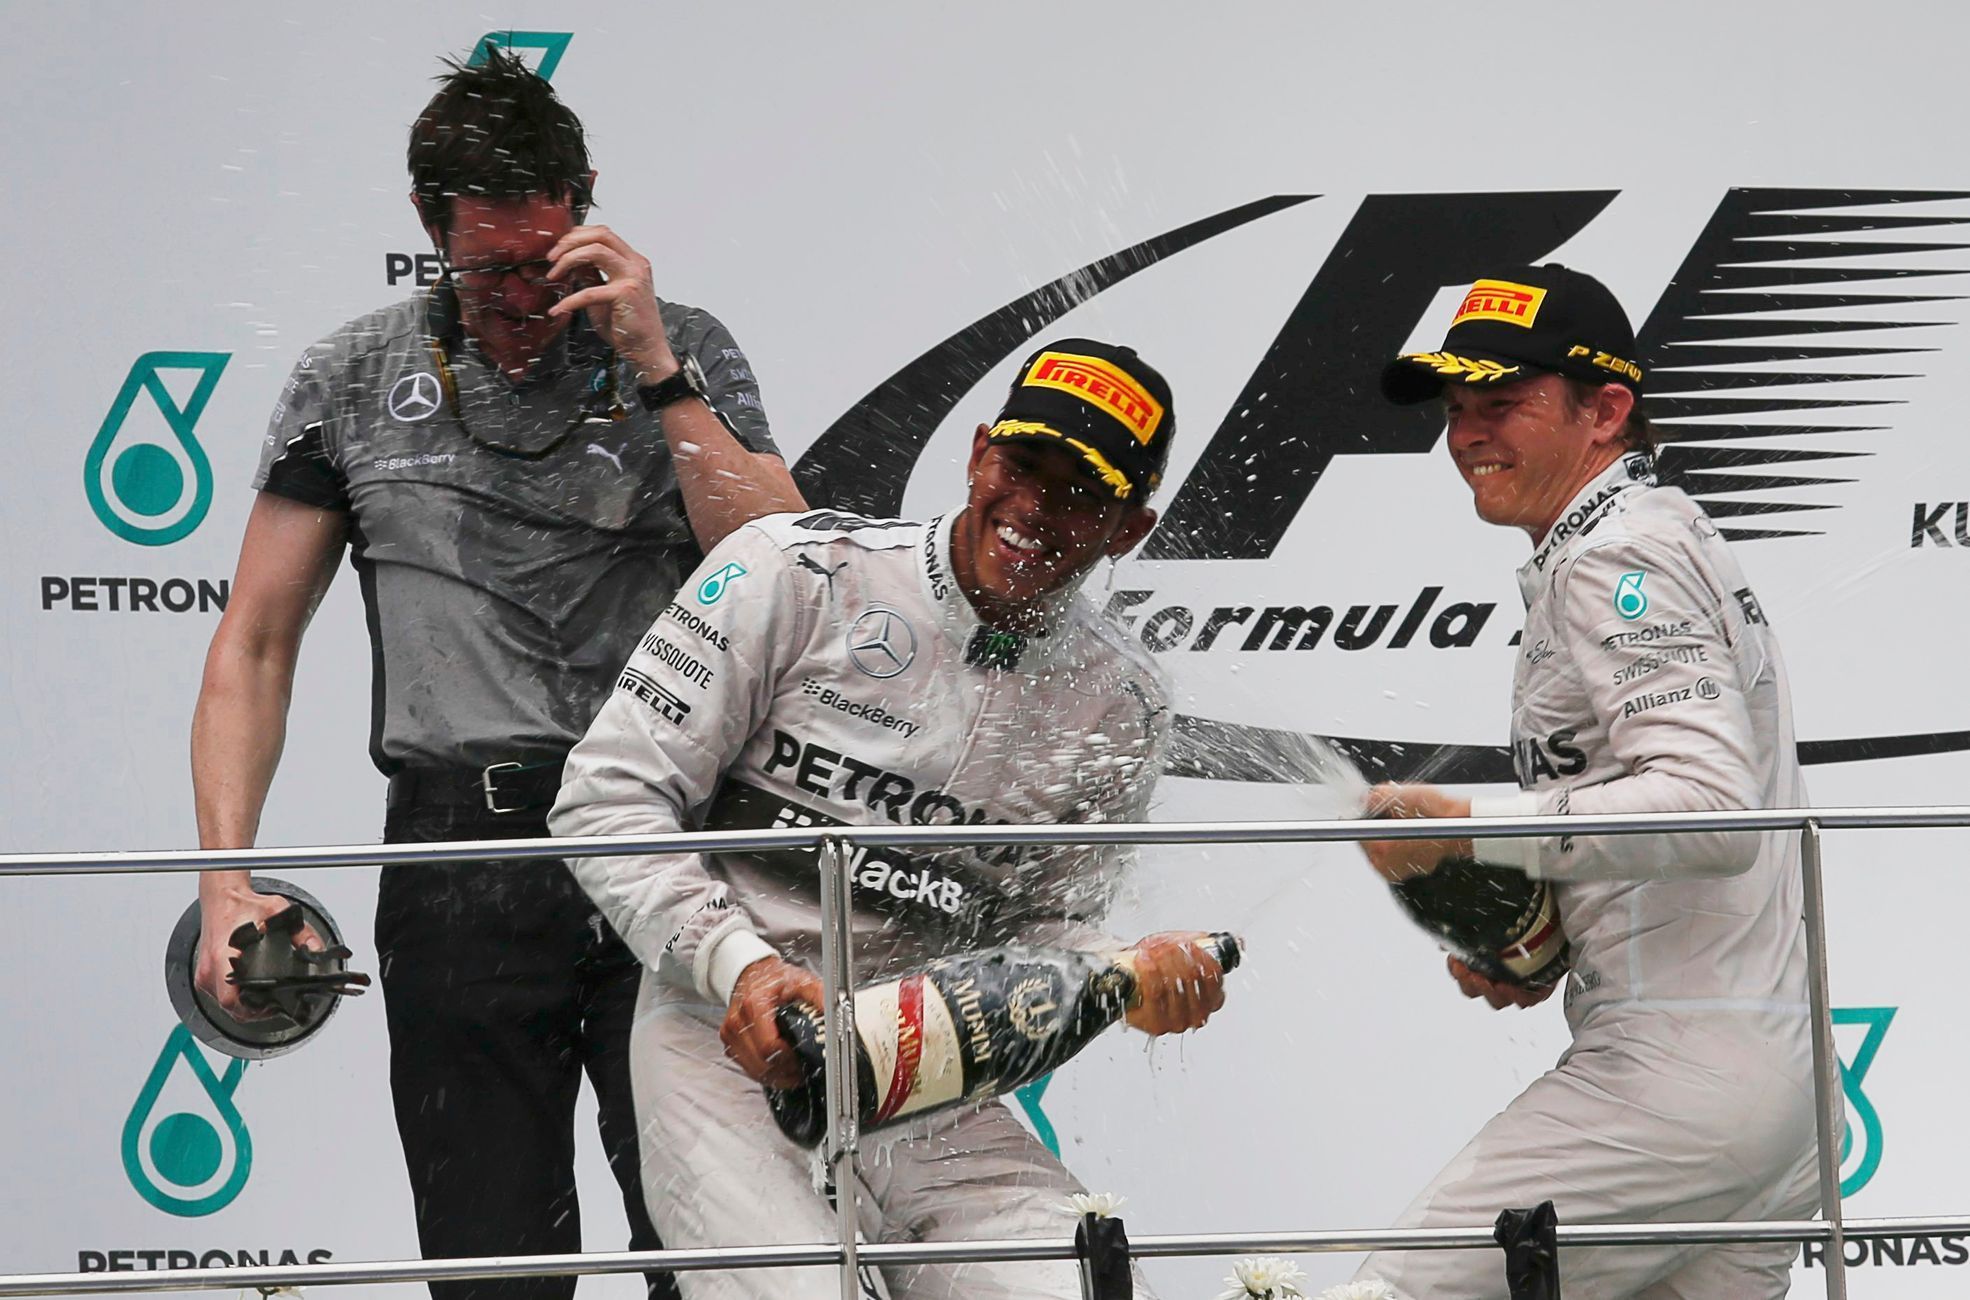 Mercedes Formula One driver Hamilton of Britain celebrates with team mate second-placed Rosberg of Germany and team engineer Shovlin after winning the Malaysian F1 Grand Prix at Sepang International C